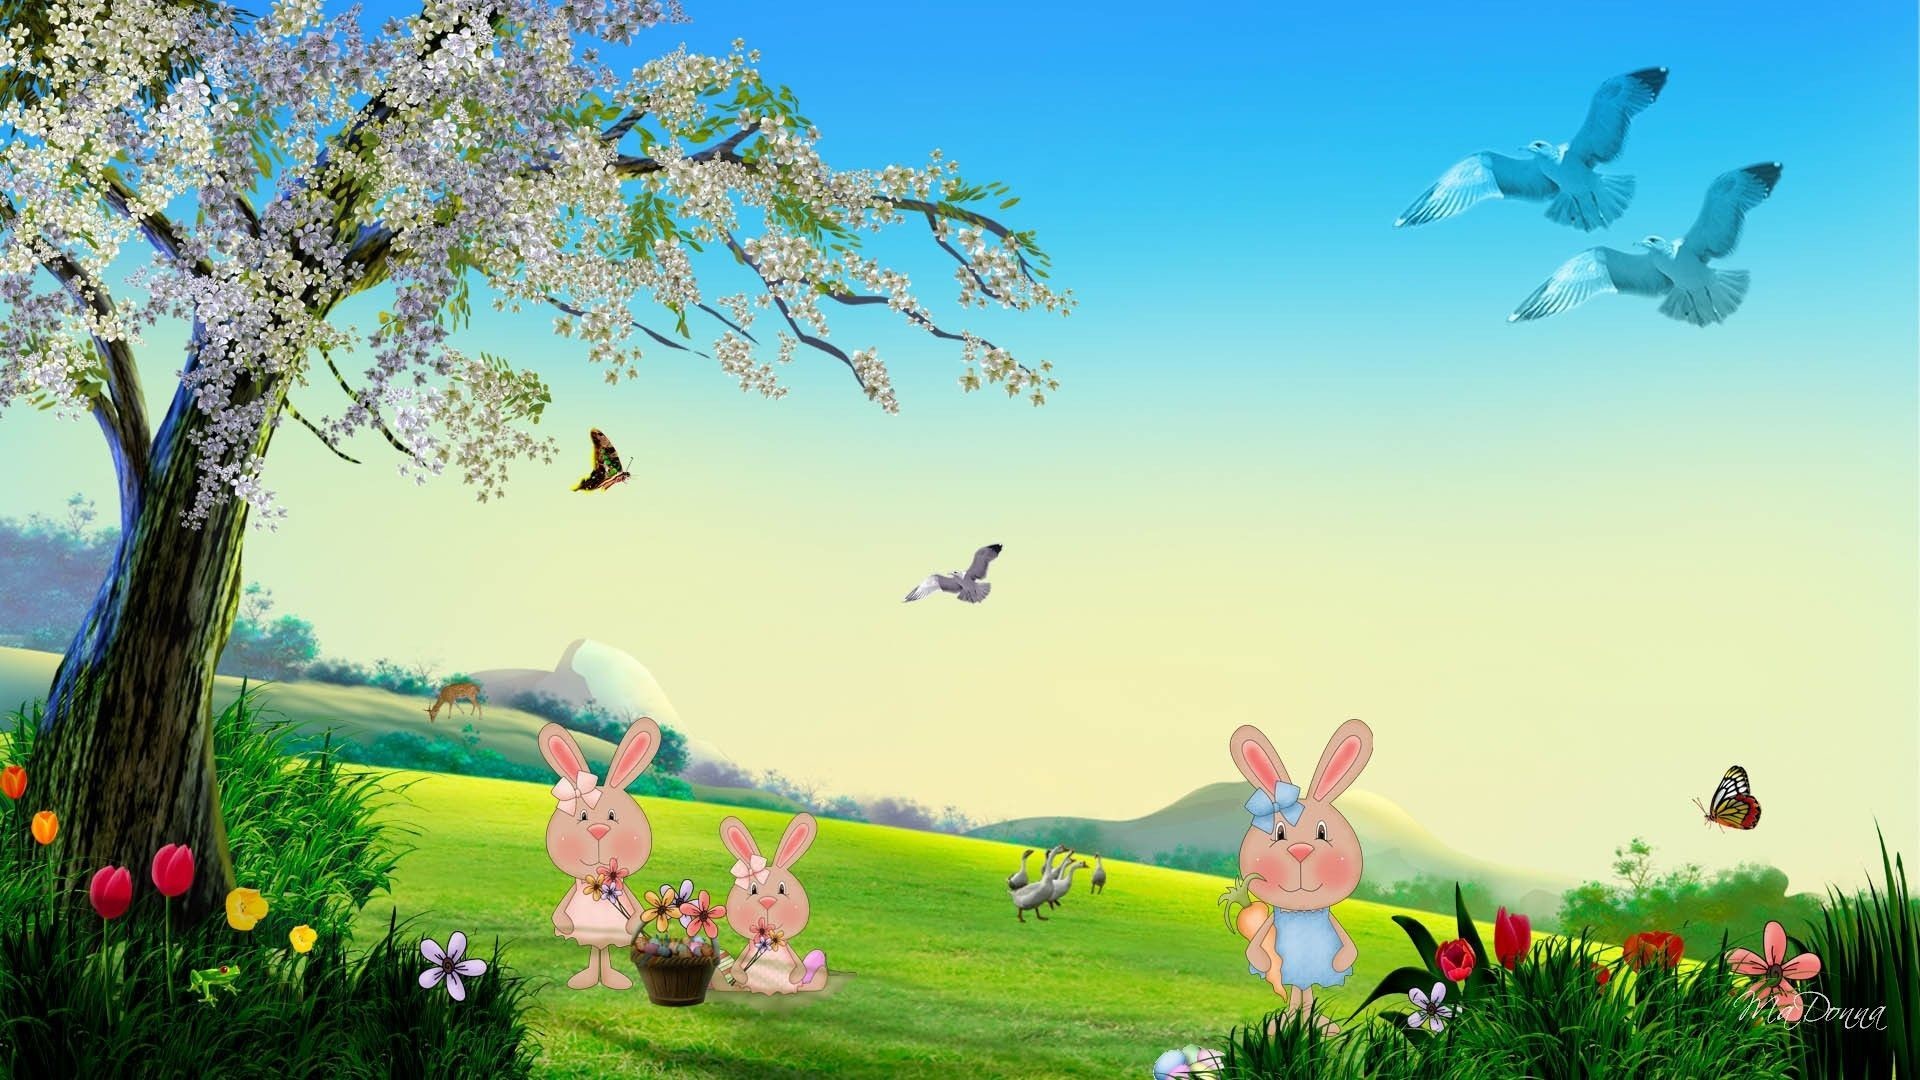 1920x1080 Easter Bunny Backgrounds Free Download.